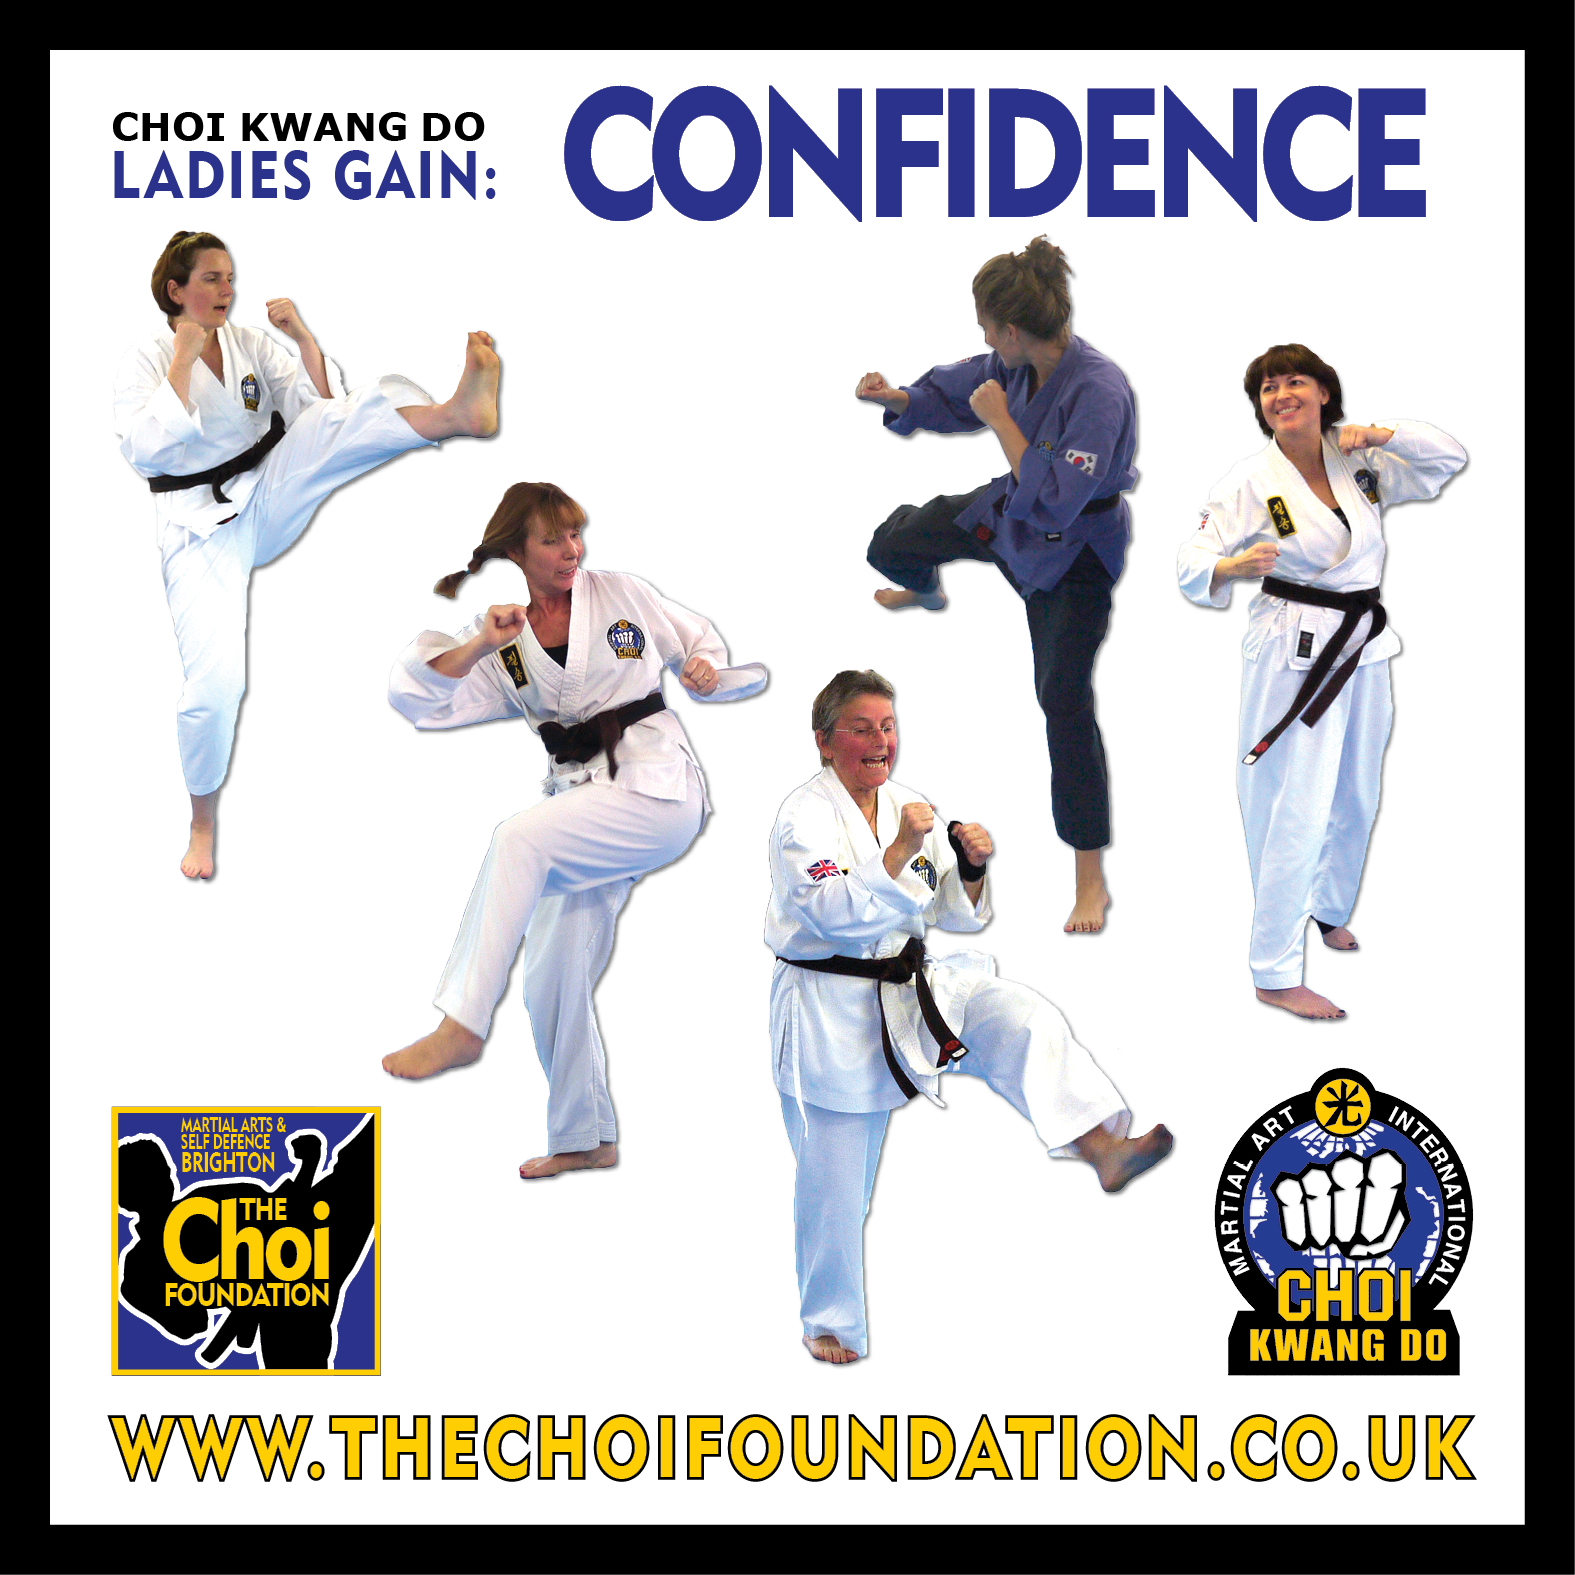 Ladies of all ages at Martial Arts and Self Defence Classes in Brighton at The Choi Foundation